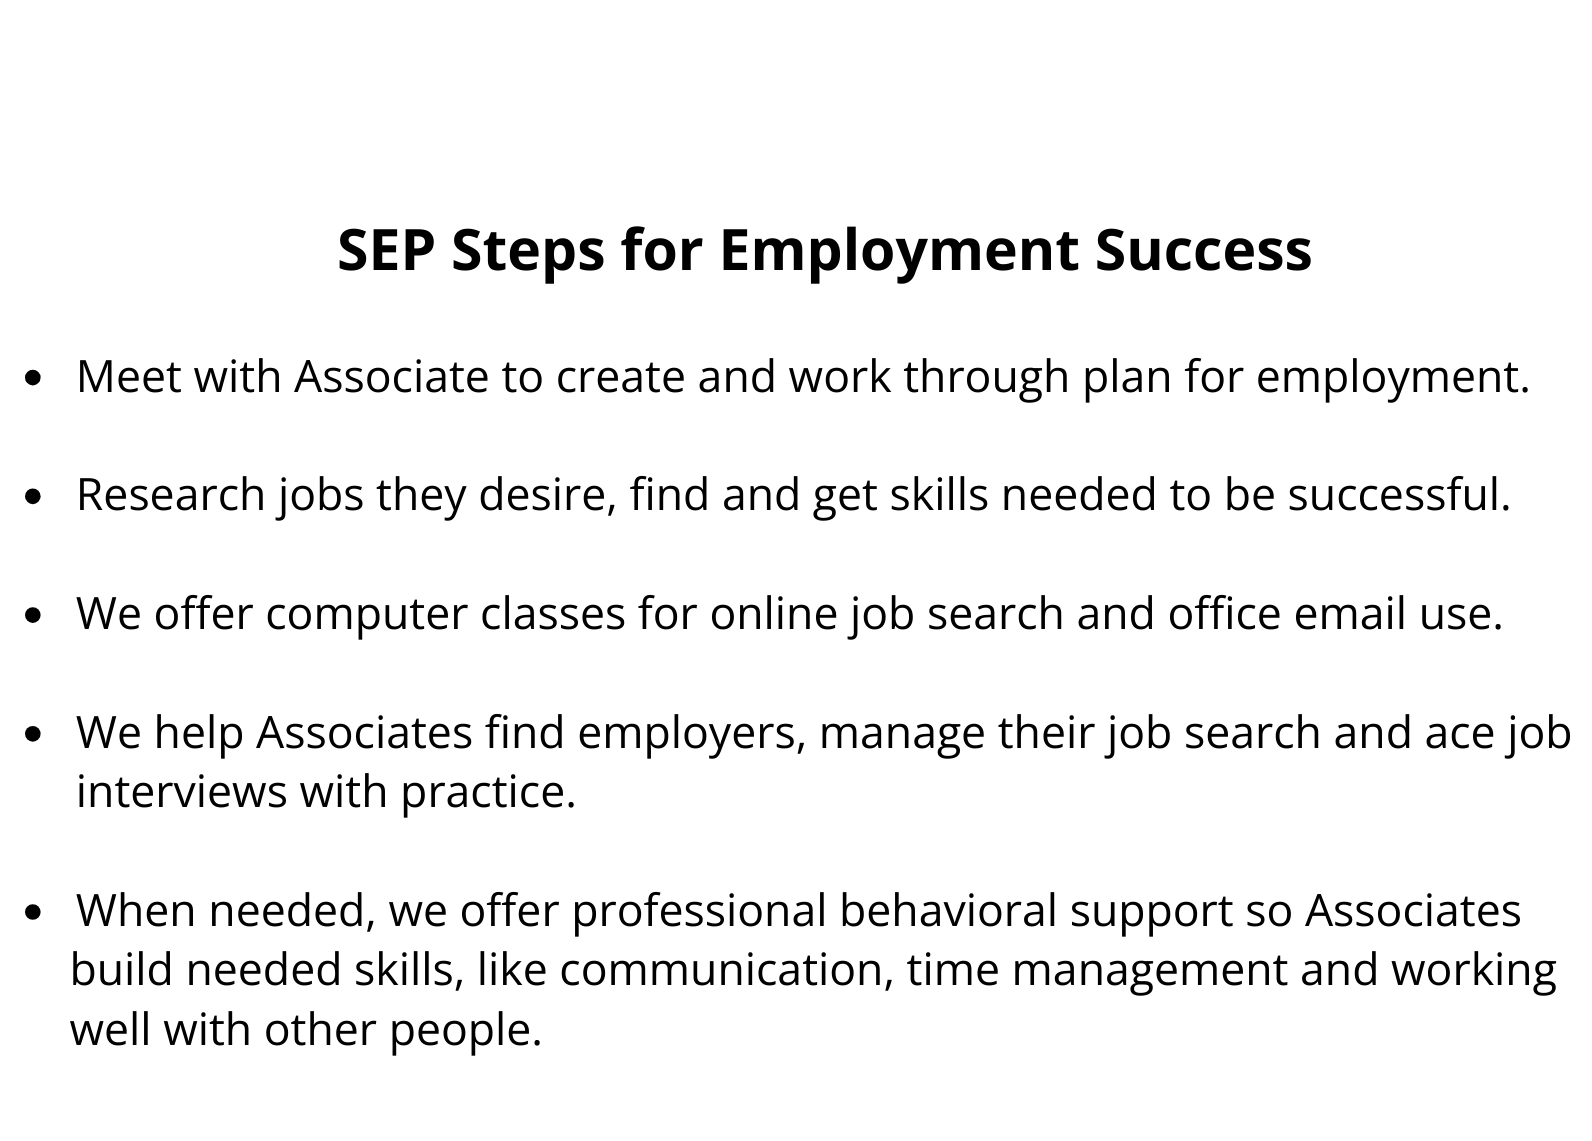 SEP Steps for Employment Success Meet with Associate to create and work through plan for employment. Research jobs they desire, find and get skills needed to be successful. We offer computer classes for online job search and office email use. We help Associates find employers, manage their job search and ace job interviews with practice. When needed, we offer professional behavioral support so Associates build needed skills, like communication, time management and working well with other people.